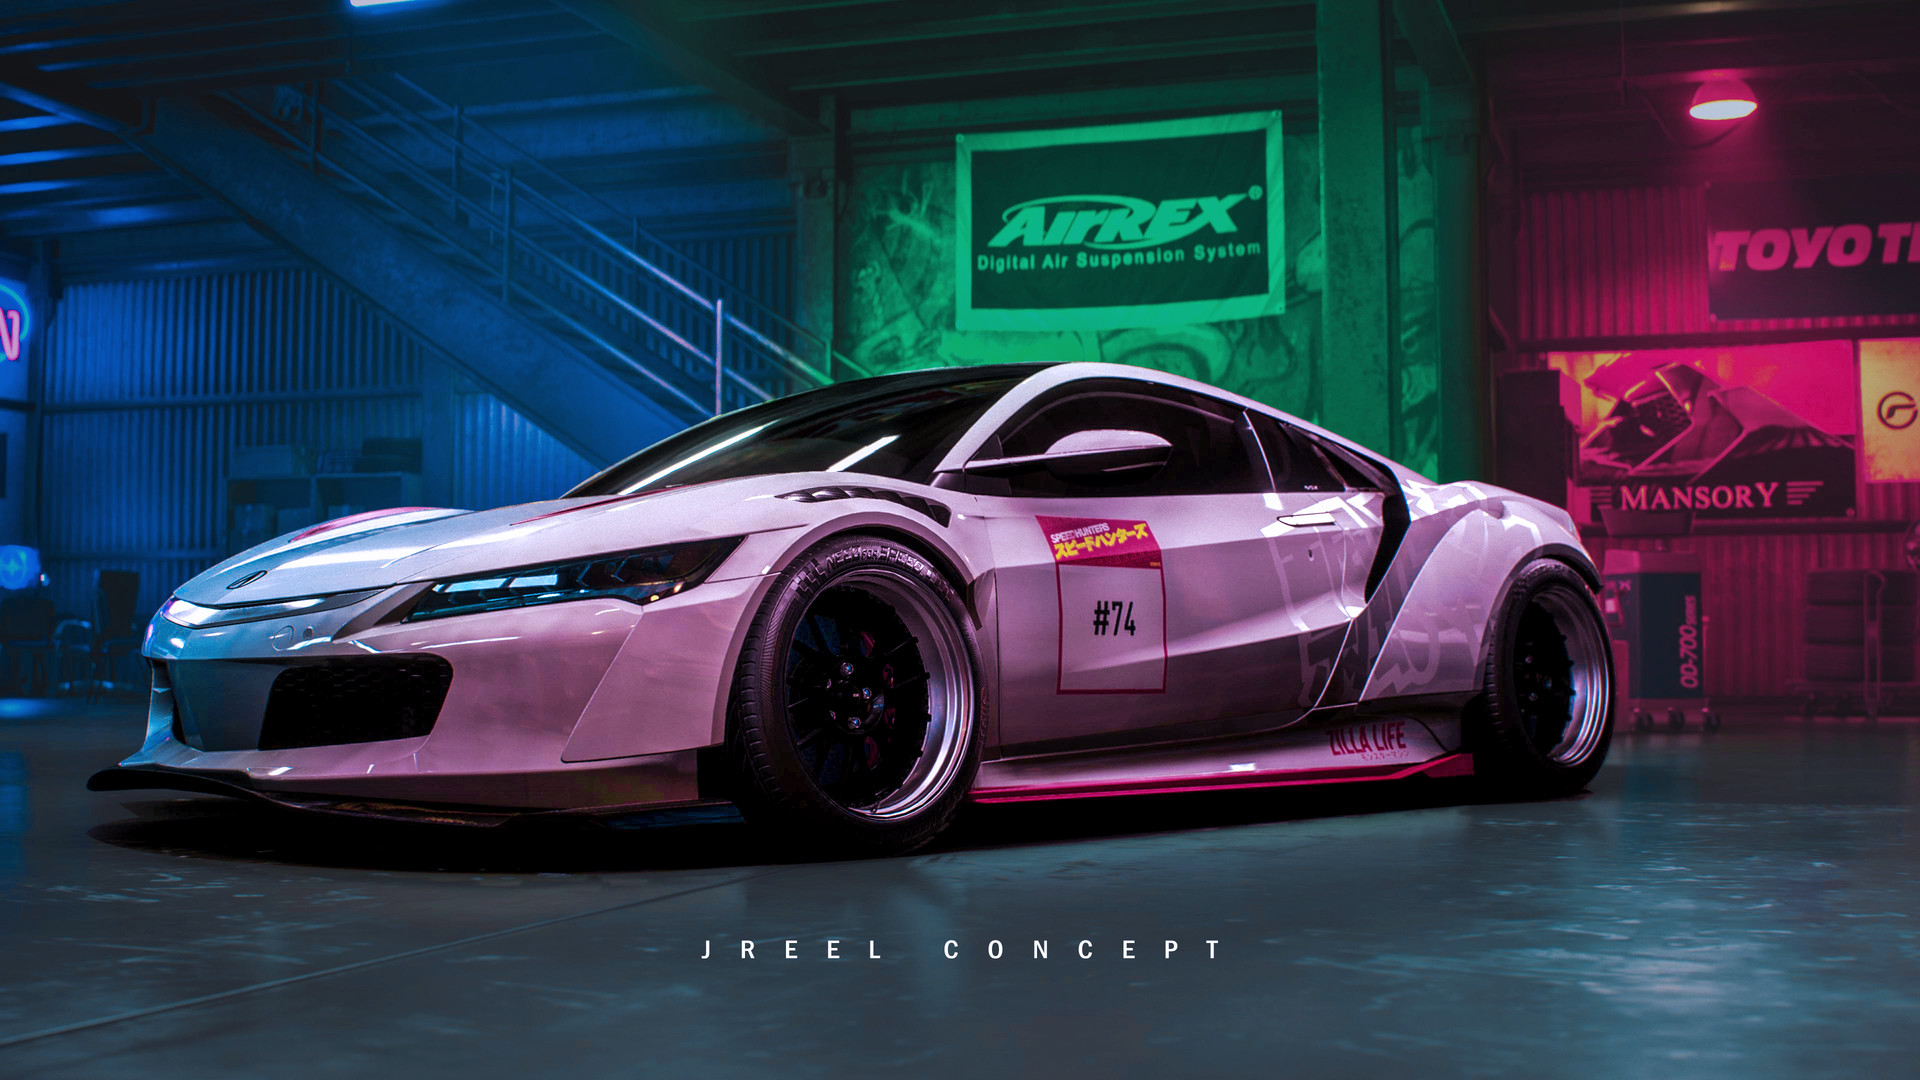 iphone xs max need for speed payback background